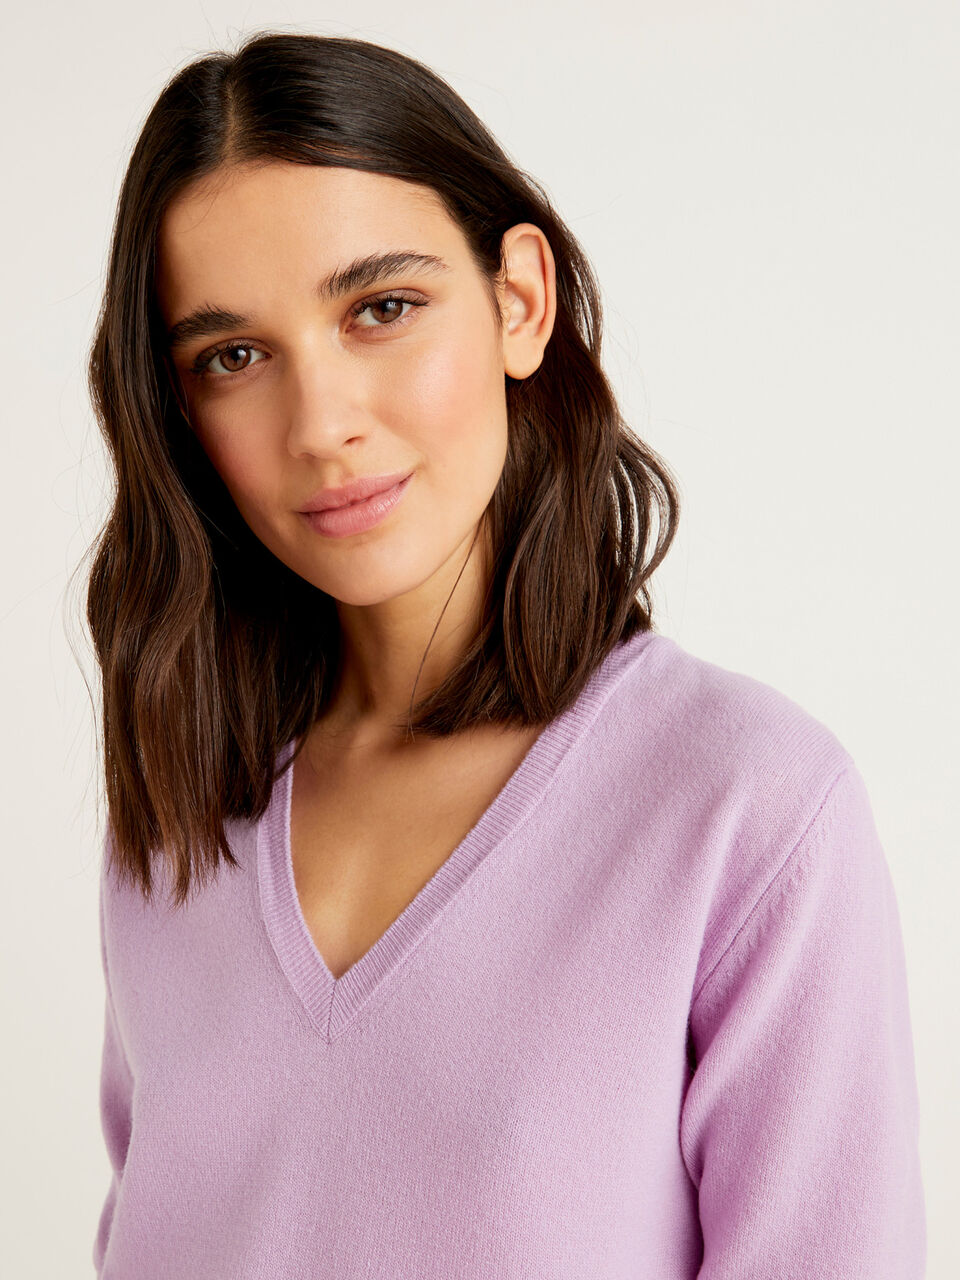 Lilac V-neck sweater in pure Merino wool - Lilac